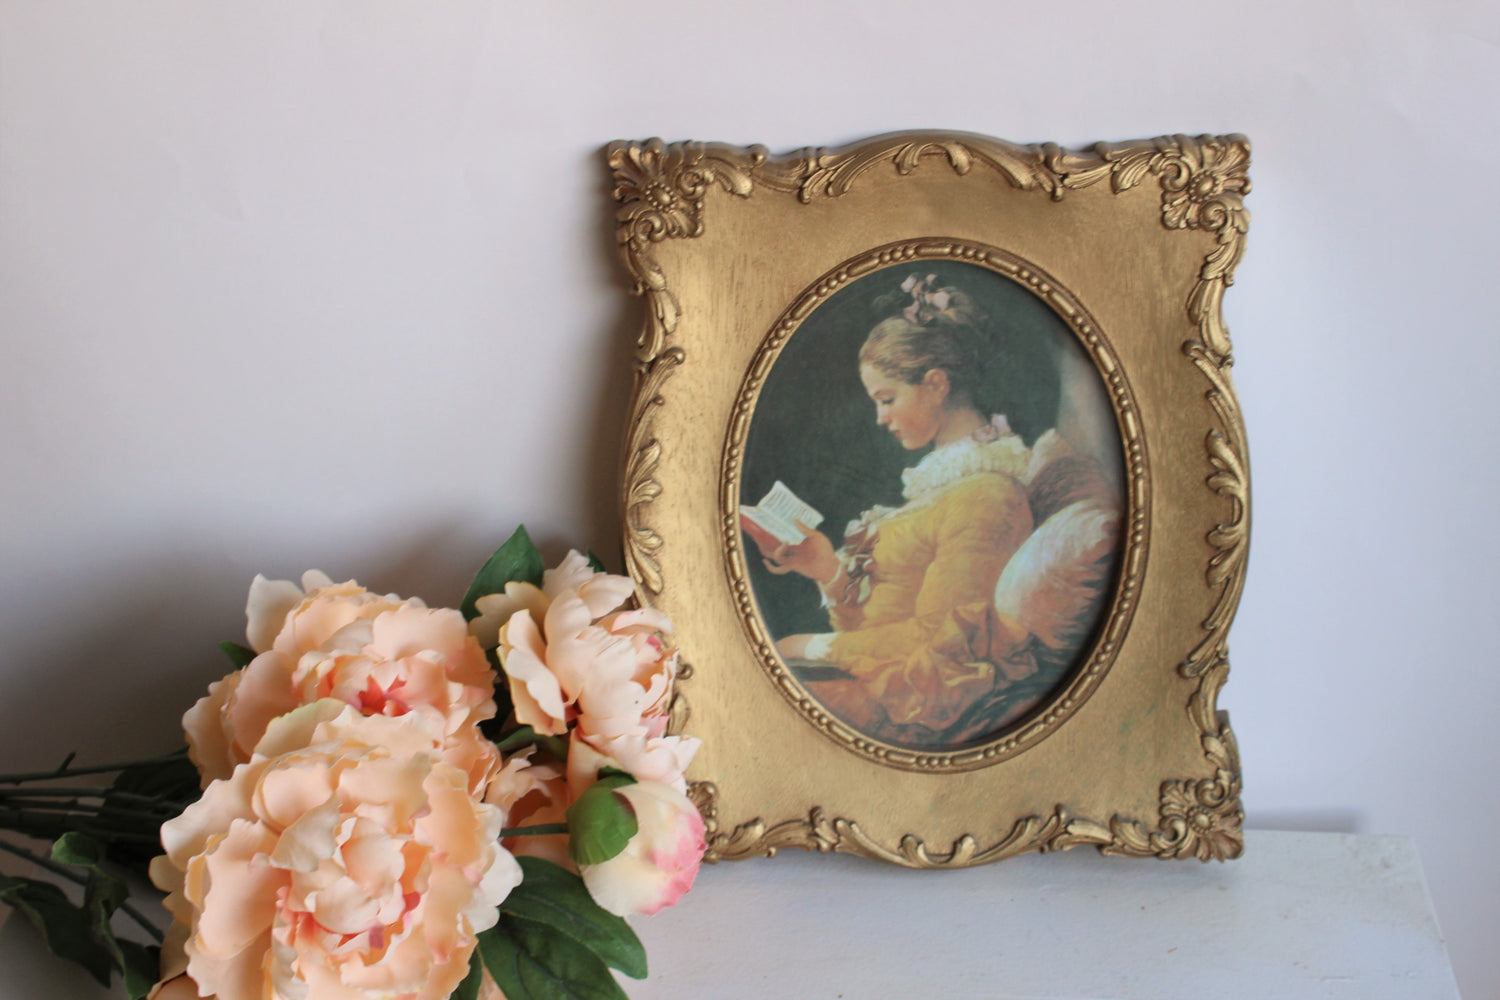 Vintage 1970s Framed Portrait in Gold Syroco Wood by Homco